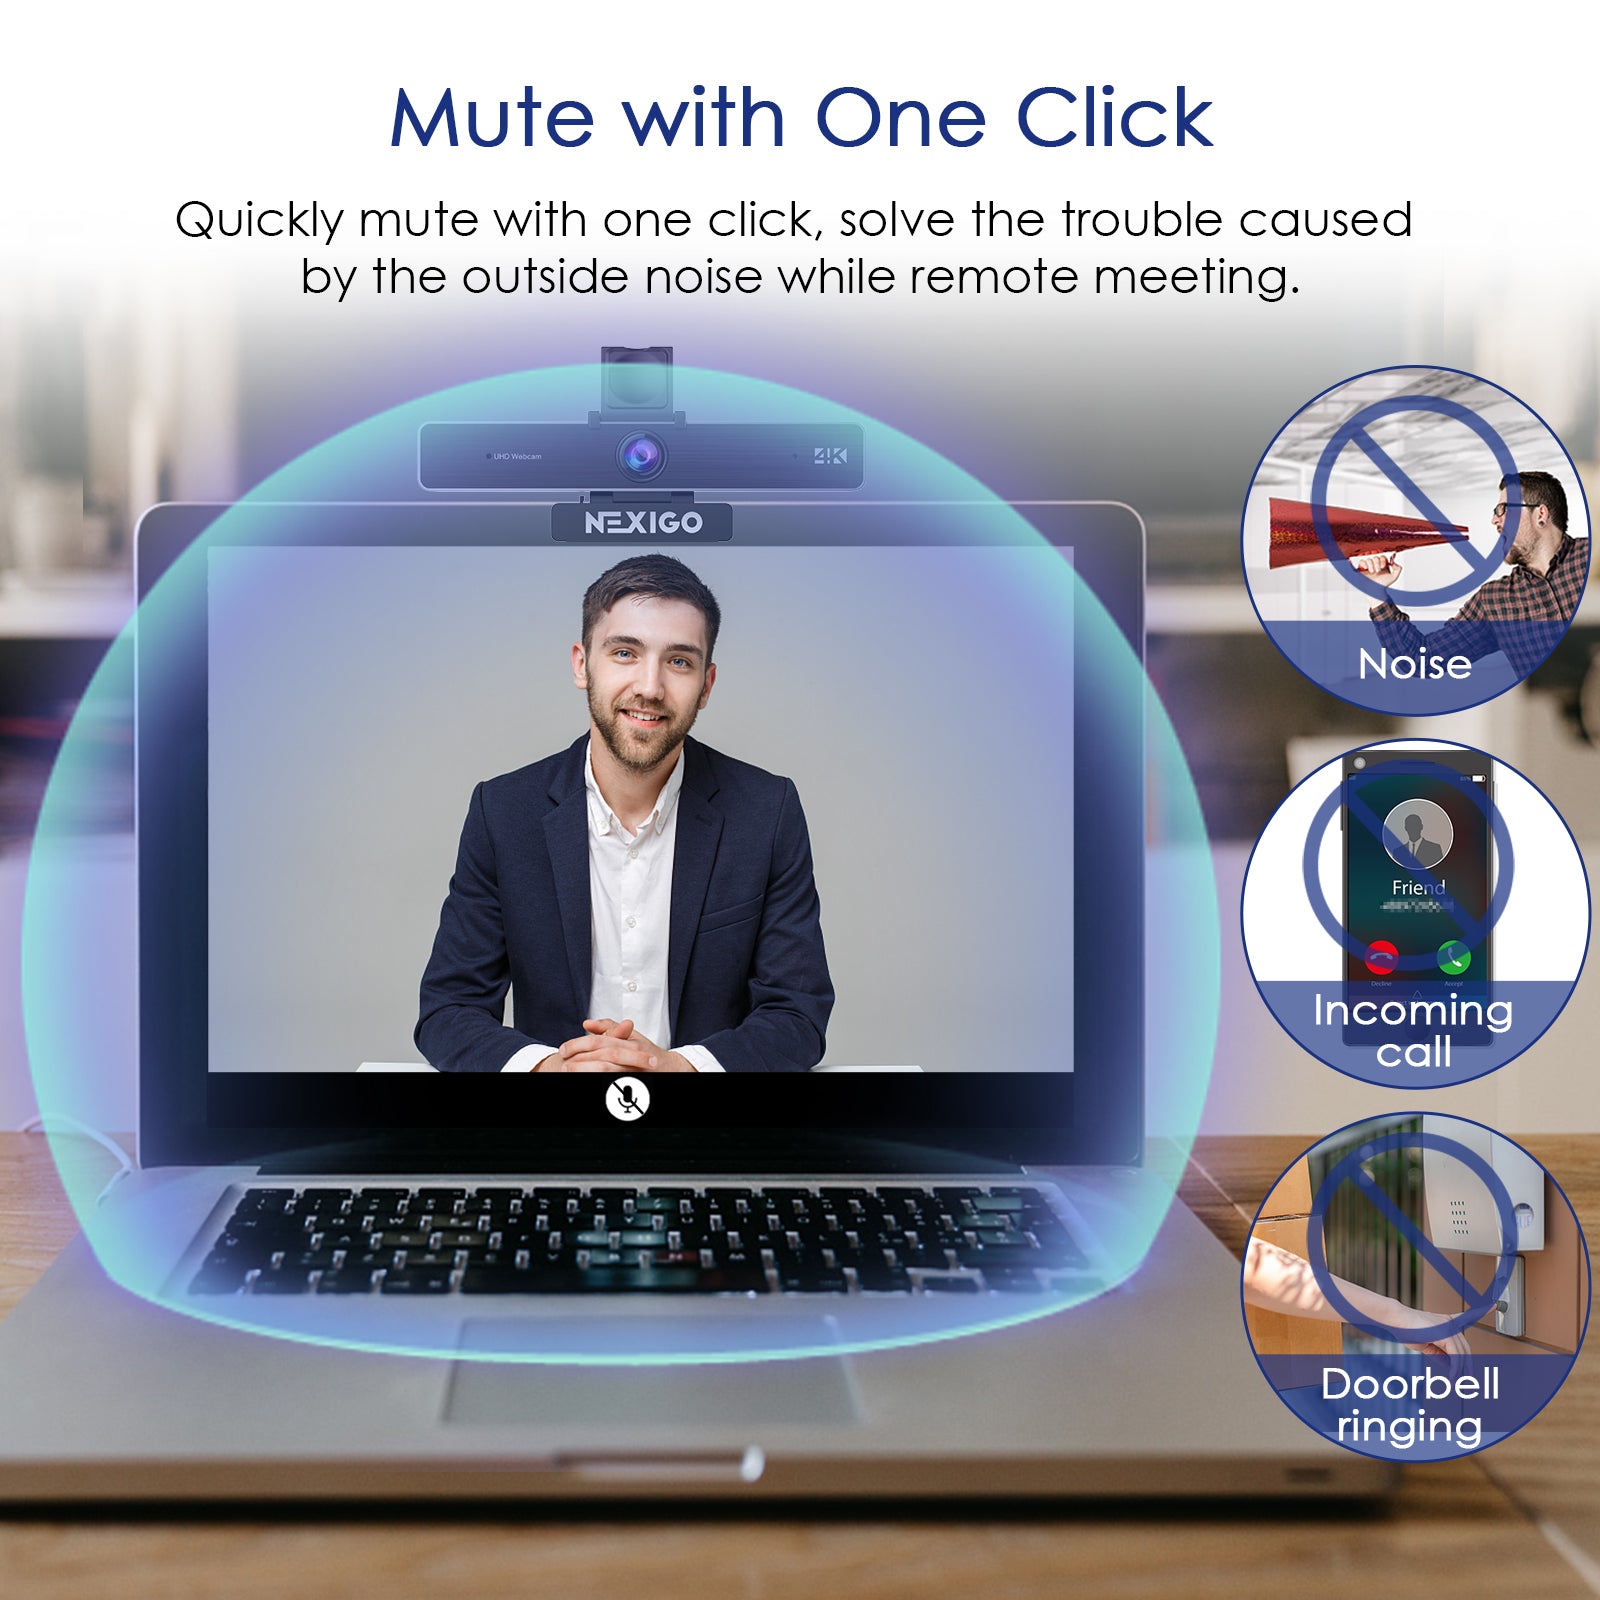 One-click mute with the remote control to avoid transmitting background noise during video calls.